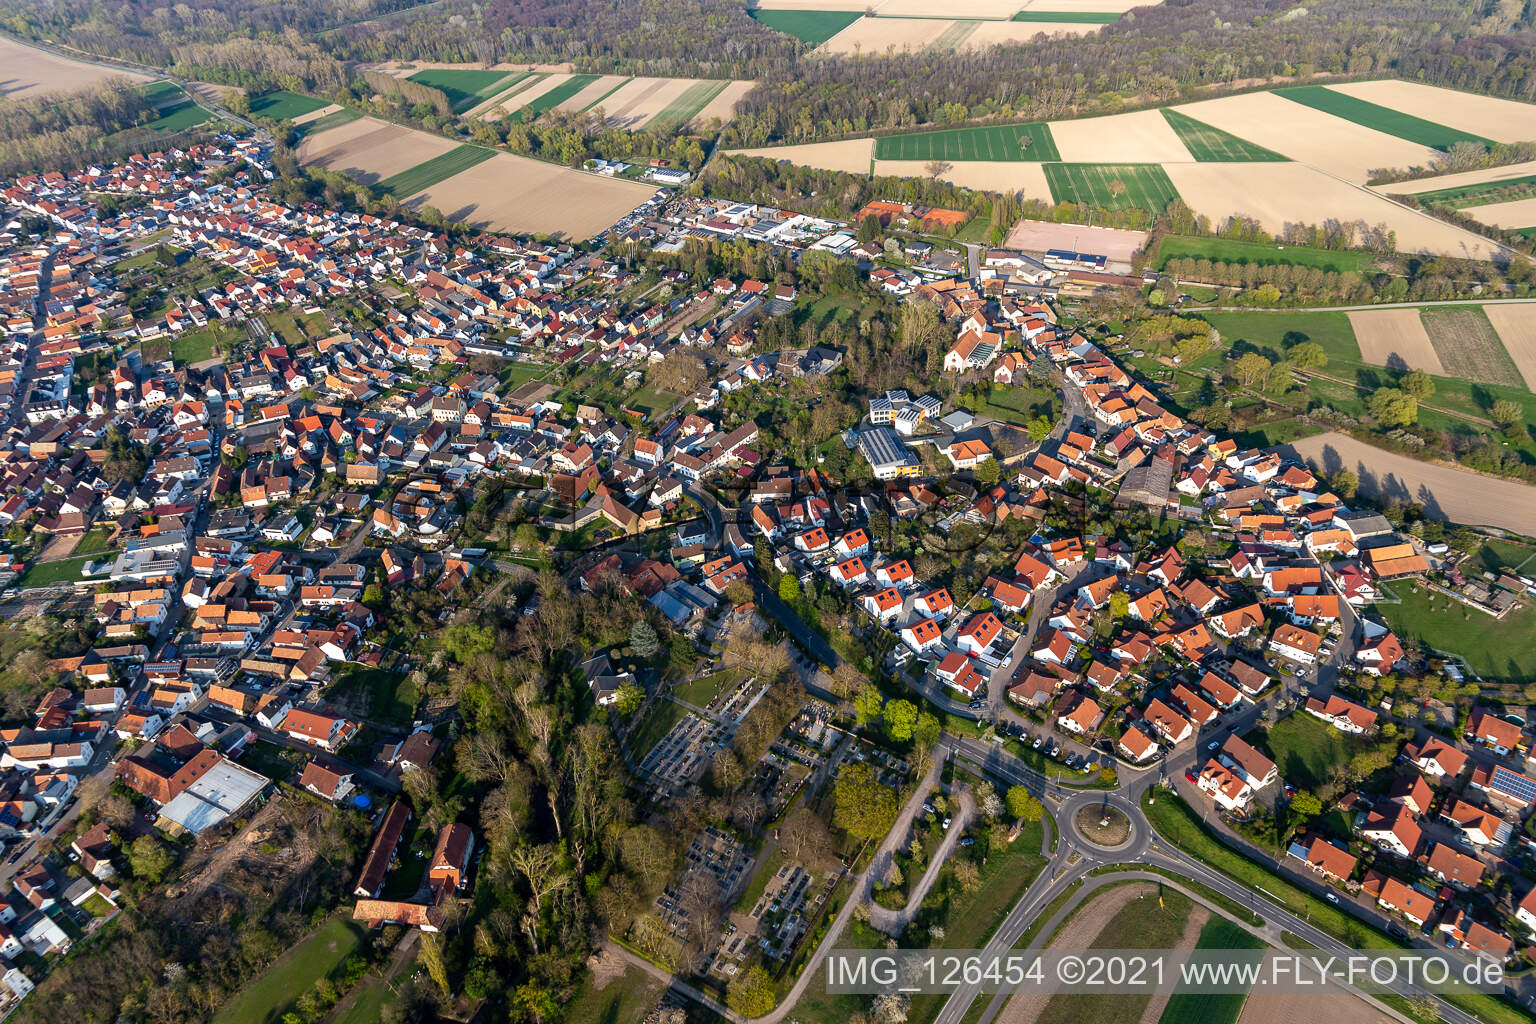 Hördt in the state Rhineland-Palatinate, Germany from above